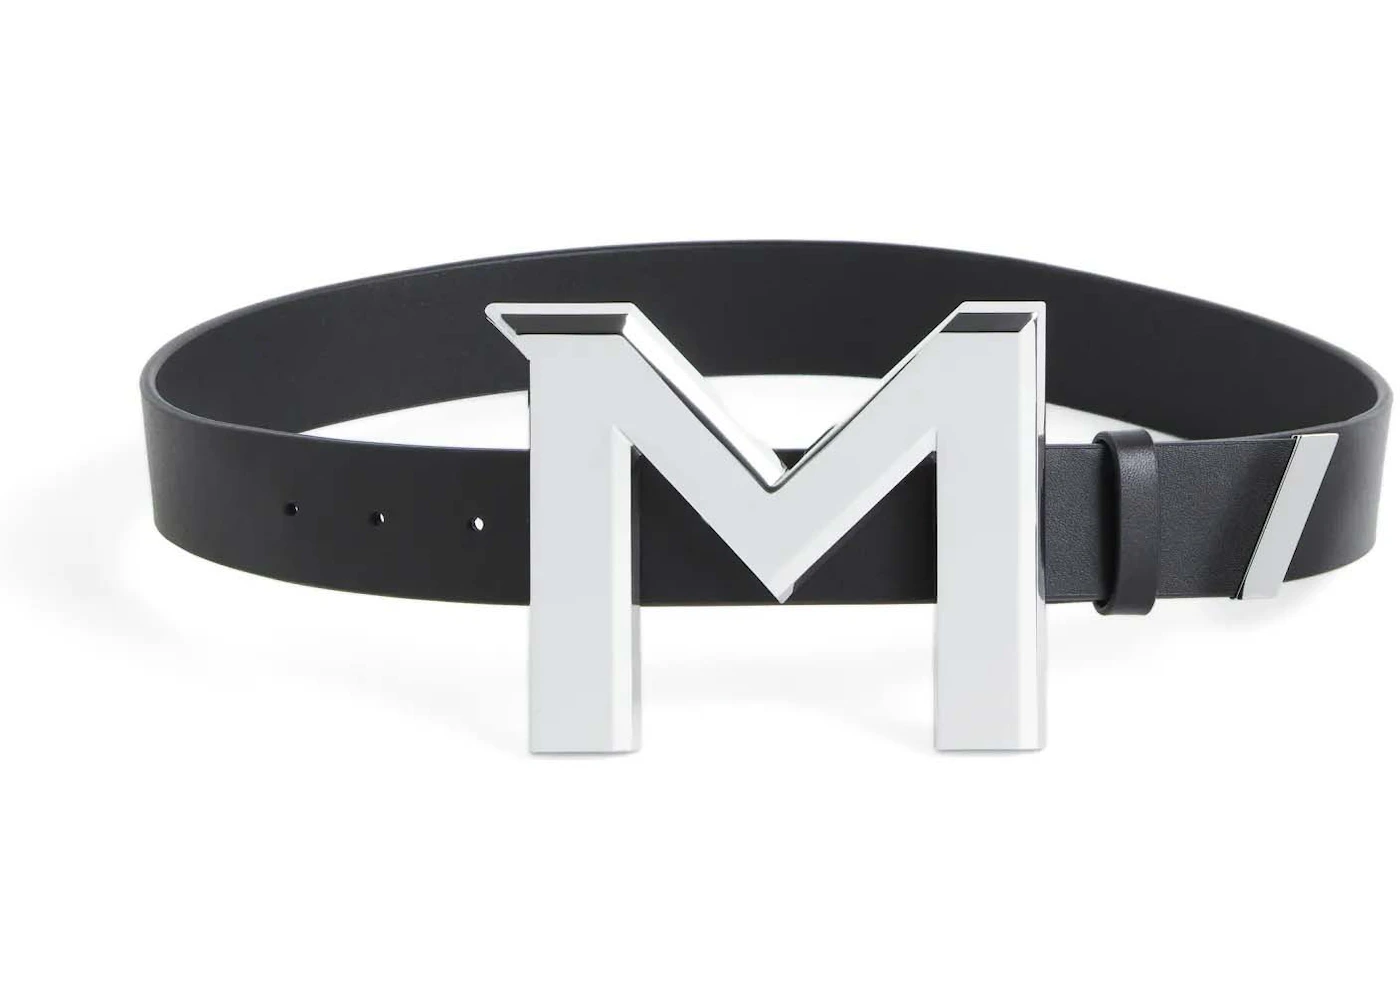 Mugler H&M M-Buckle Leather Belt Black in Leather with Silver-tone - US